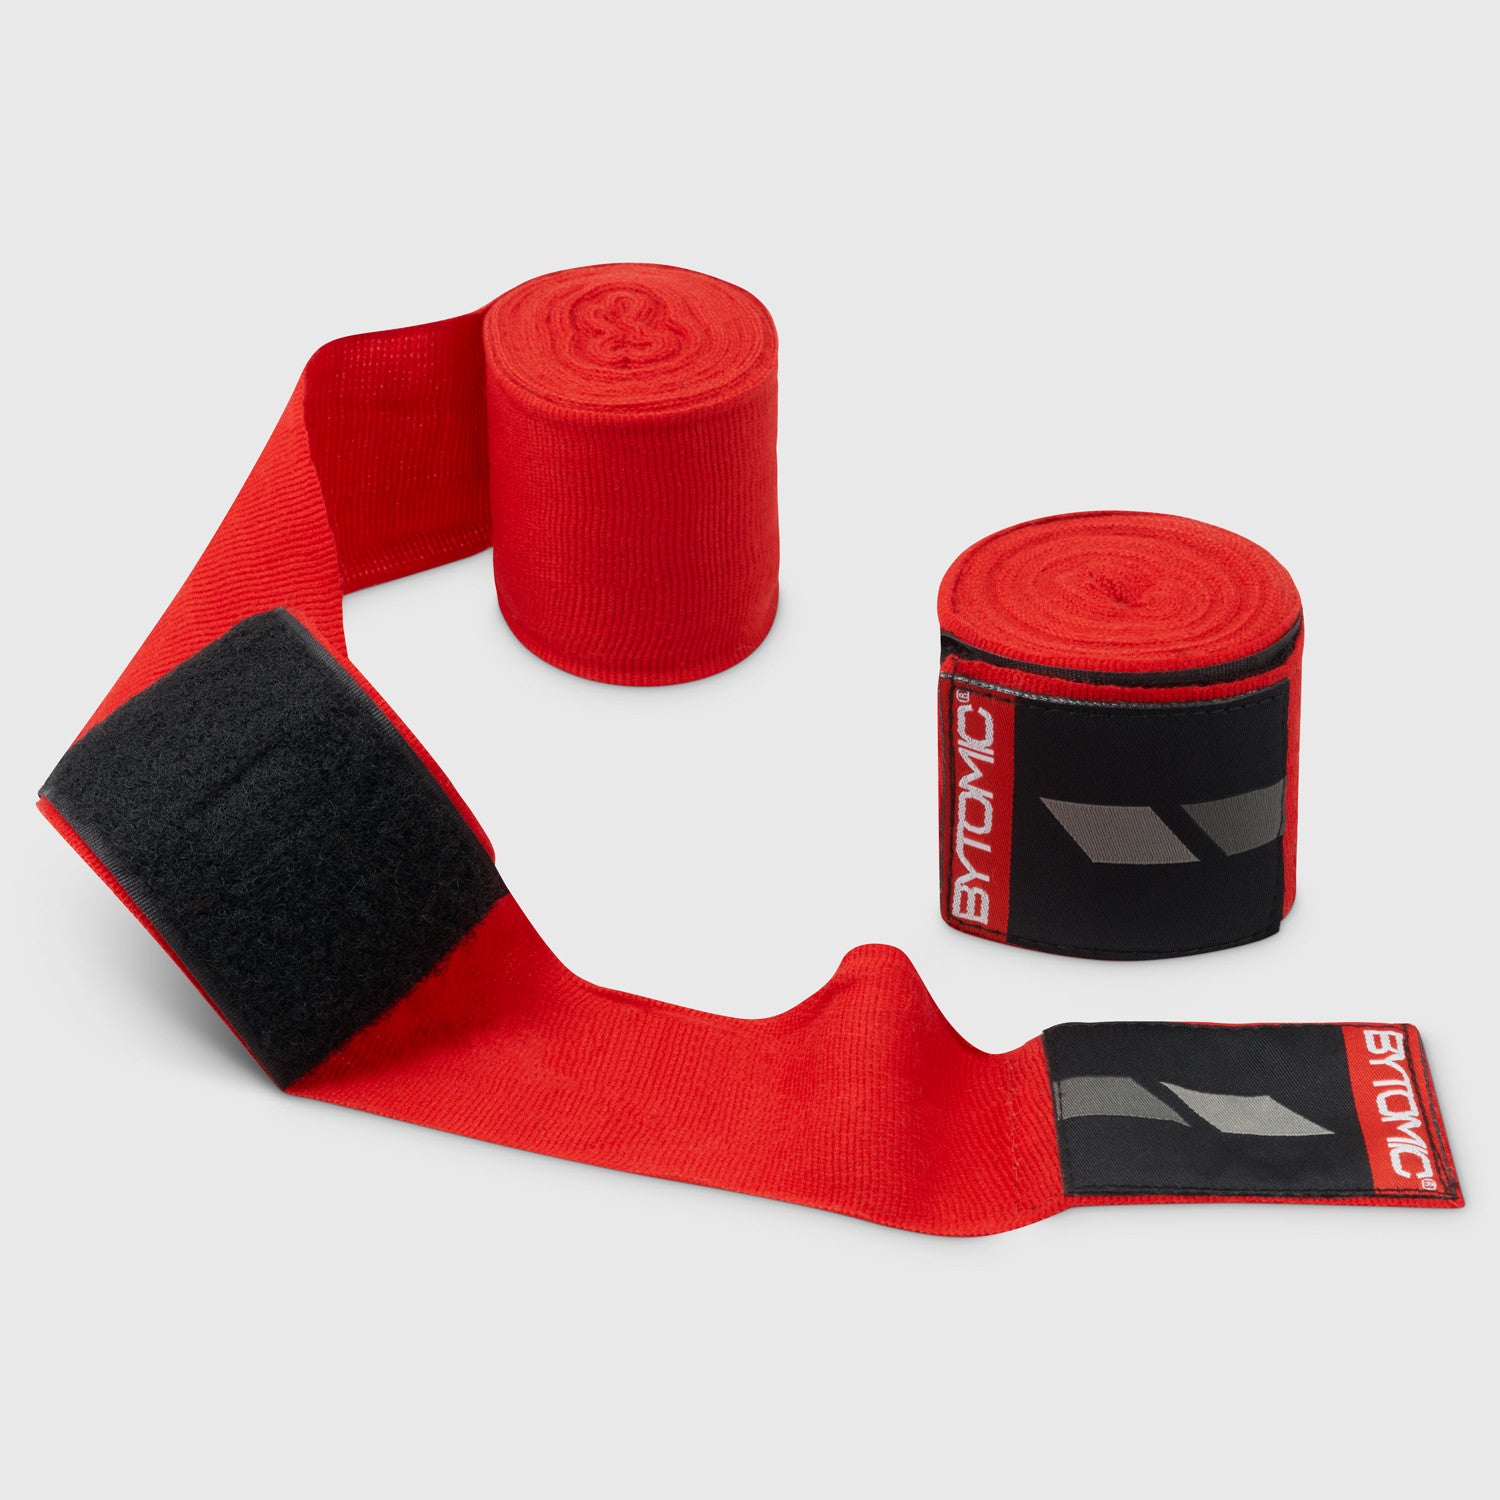 BYTOMIC RED LABEL MEXICAN HAND WRAPS RED